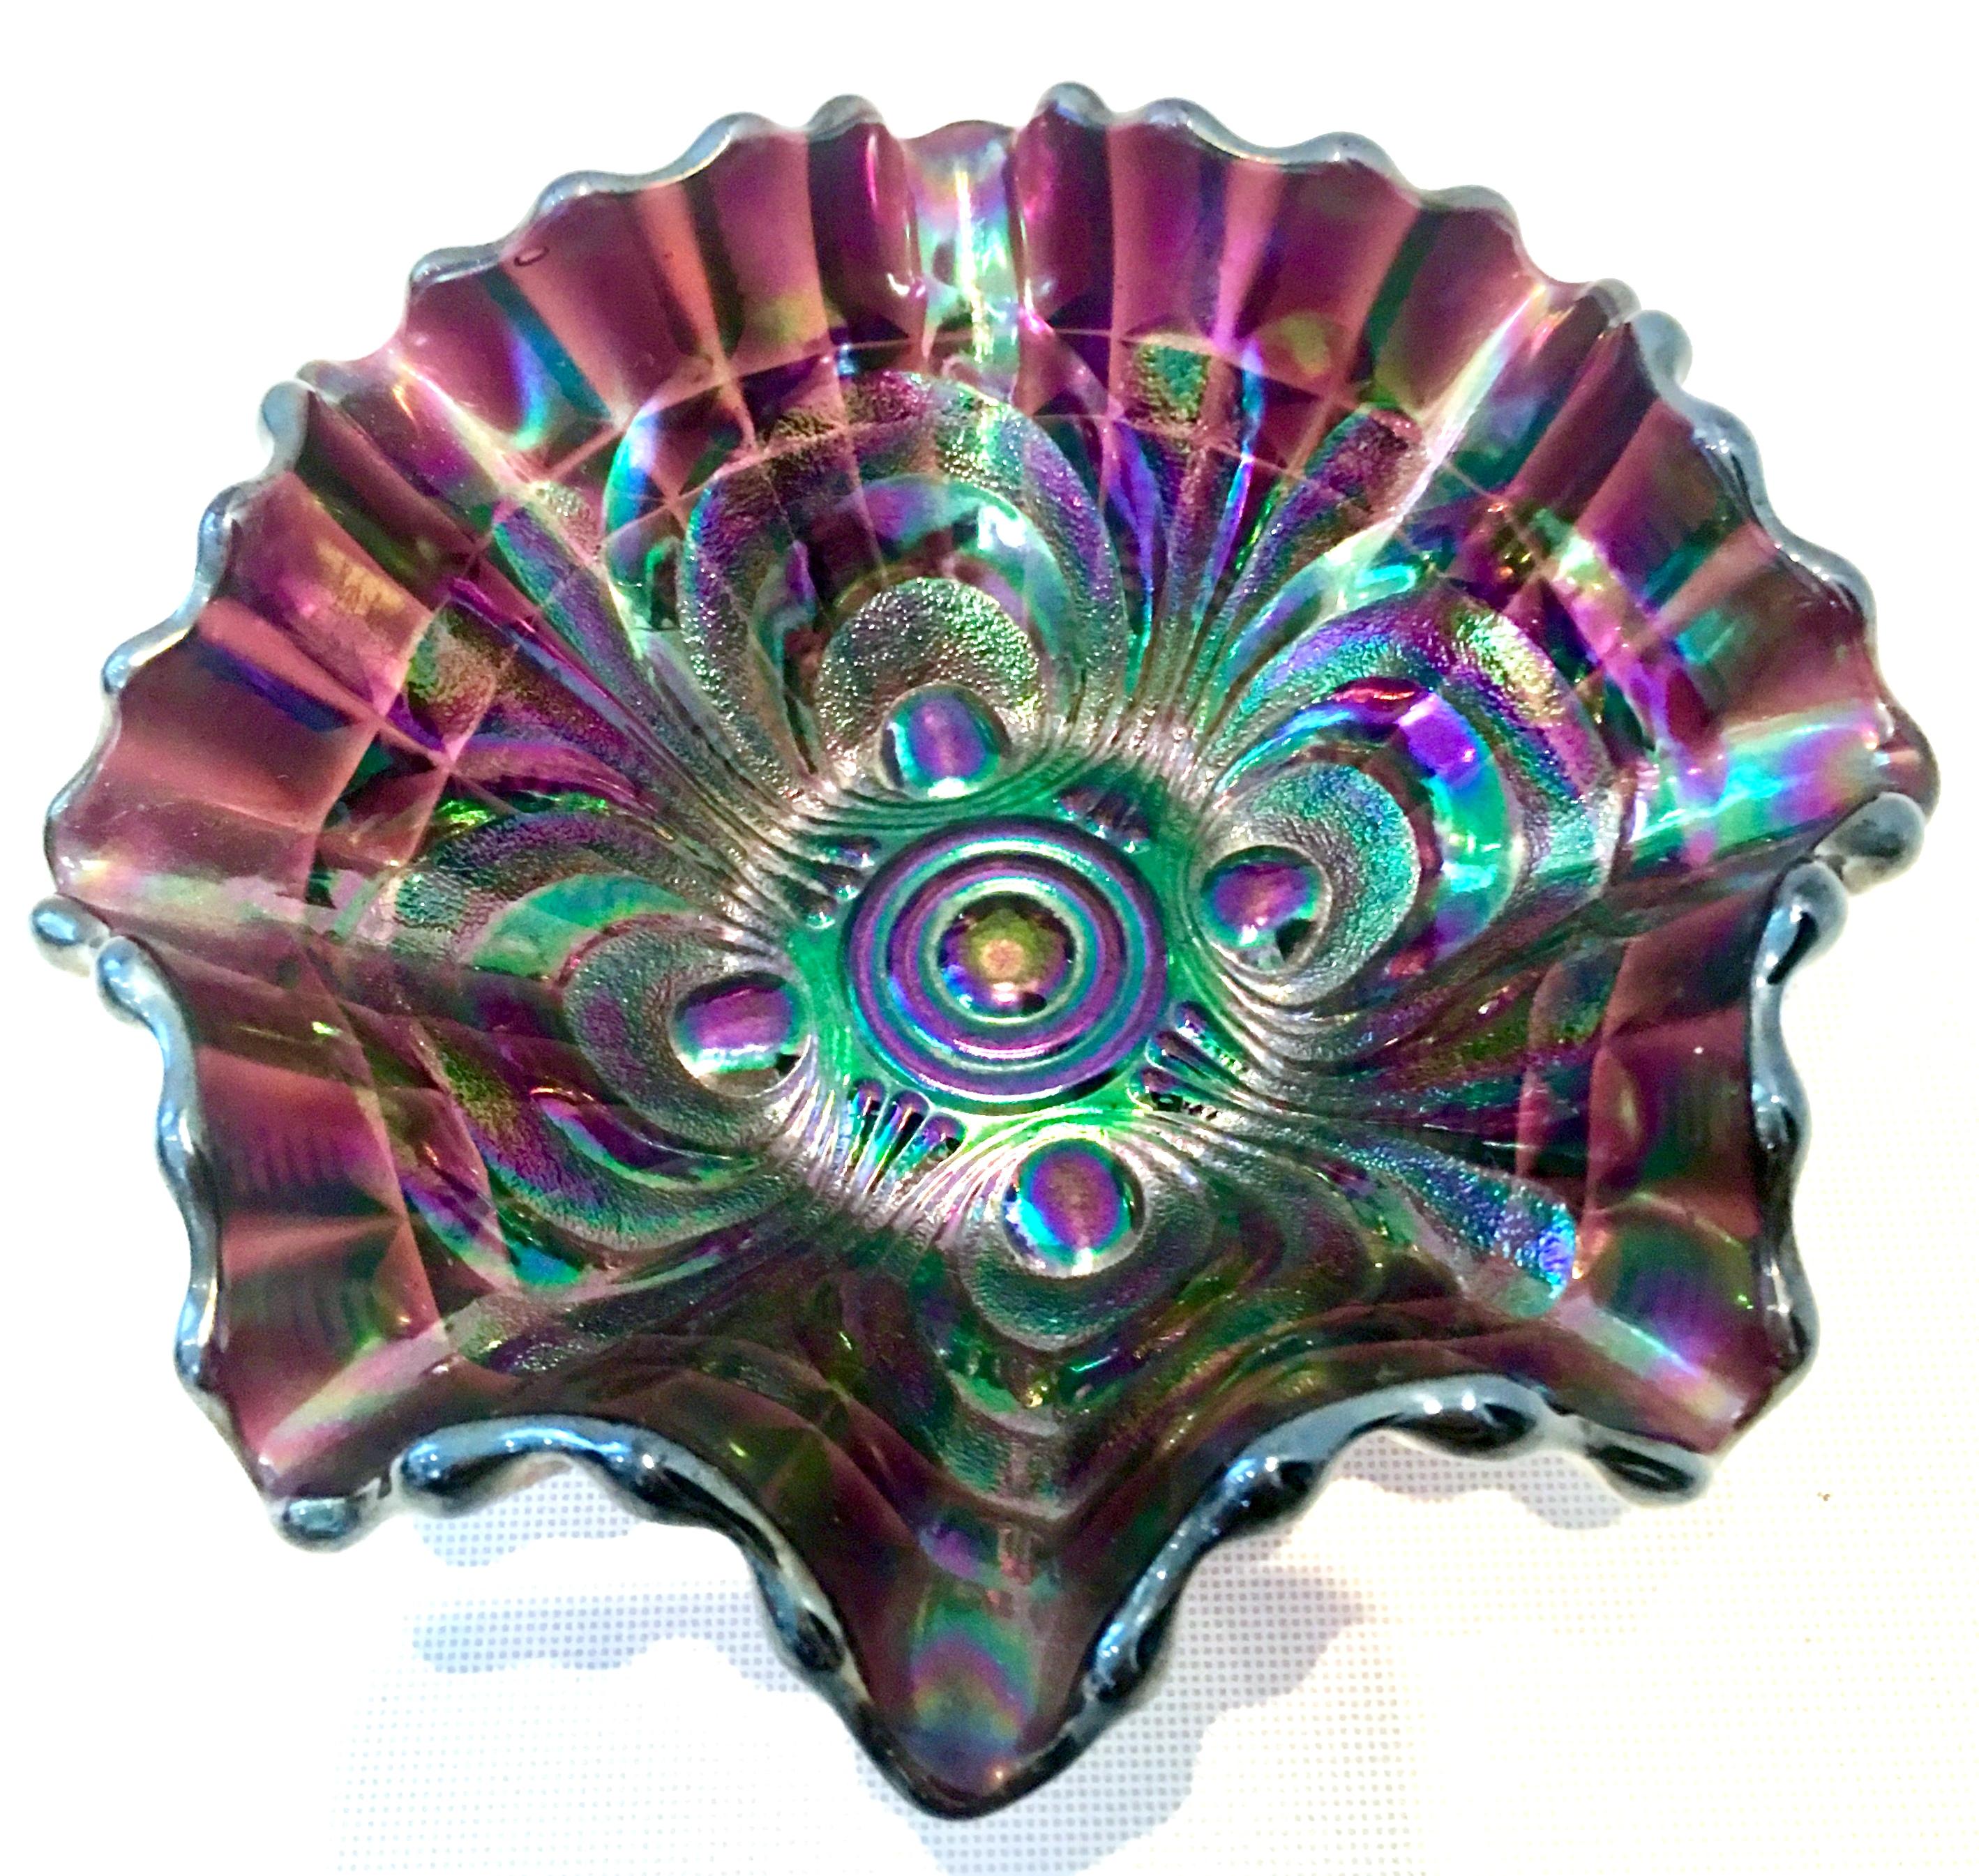 Midcentury American Art Nouveau iridescent art glass bowls set of three pieces. This trio of American iridescent amethyst art glass bowls includes, one footed bowl, one square bowl and one ruffled round bowl. The square bowl is marked on the